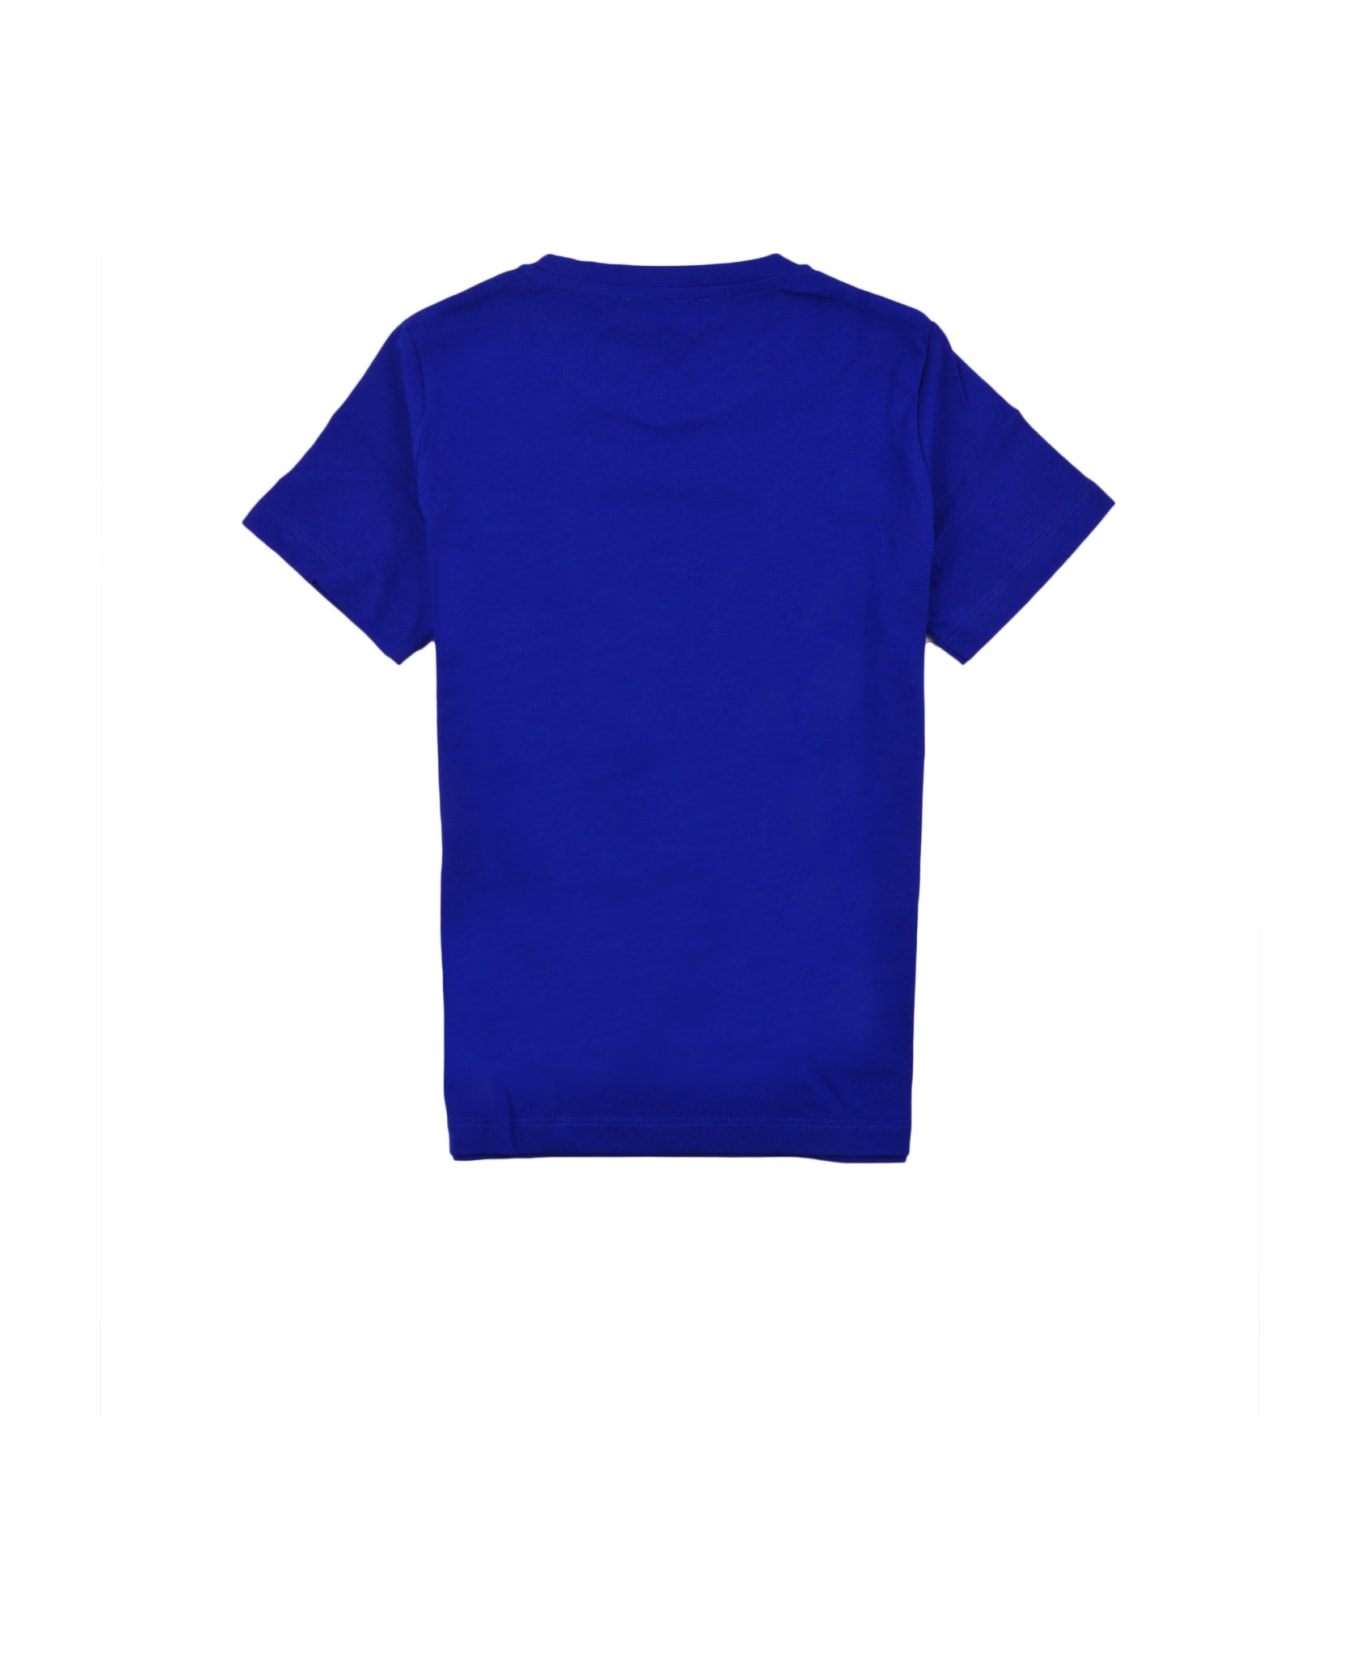 Versace T-shirt With Print And Versace Logo In Cotton - Blue